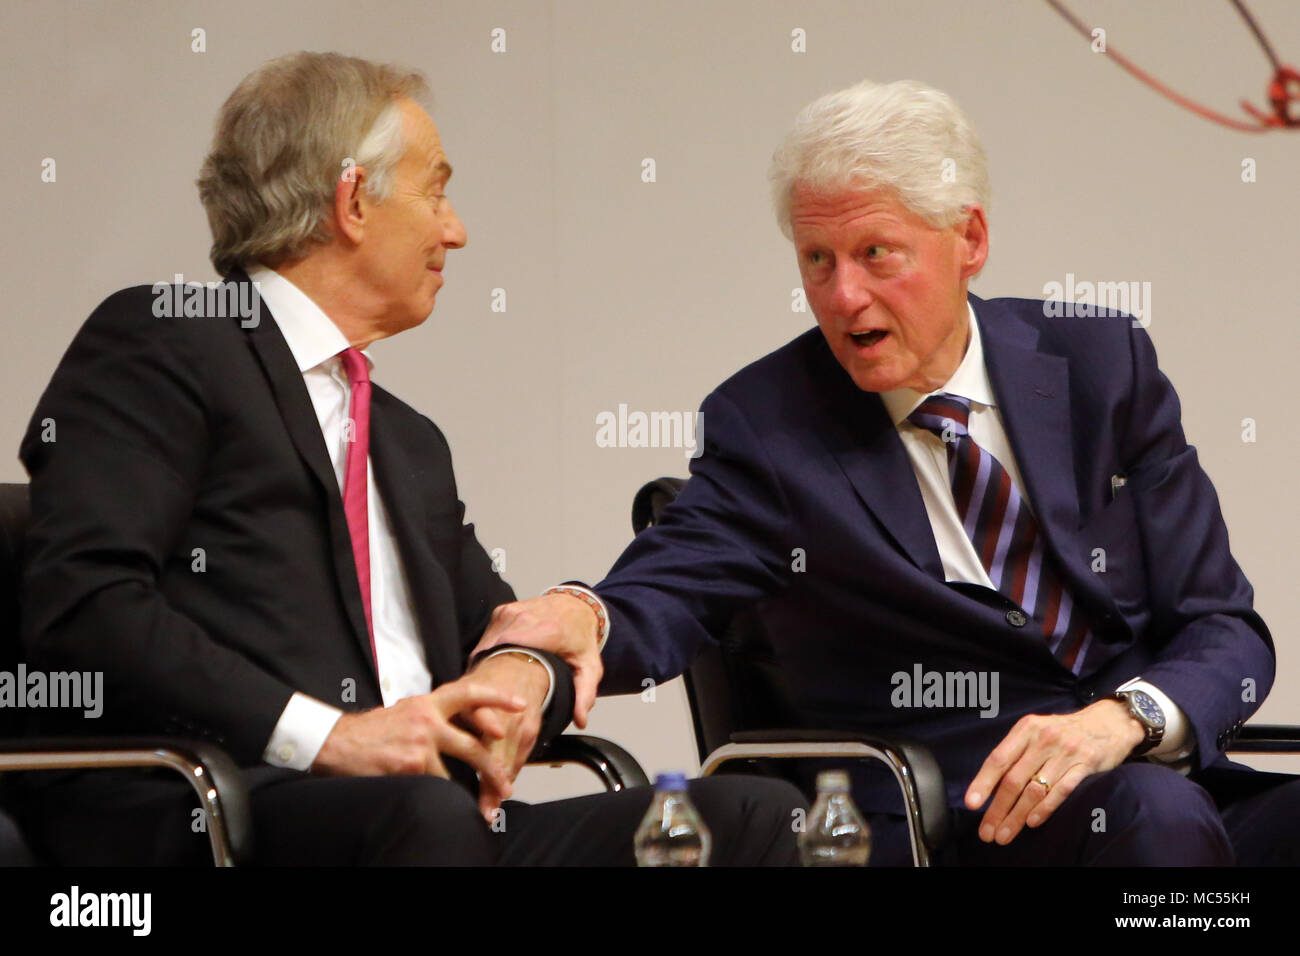 Former British Prime Minister Tony Blair and former US President Bill Clinton  at  Queen's University Belfast, Tuesday, April 10th, 2018. Tuesday marks 20 years since politicians from Northern Ireland and the British and Irish governments agreed what became known as the Good Friday Agreement. It was the culmination of a peace process which sought to end 30 years of the Troubles. Two decades on, the Northern Ireland Assembly is suspended in a bitter atmosphere between the two main parties. Stock Photo